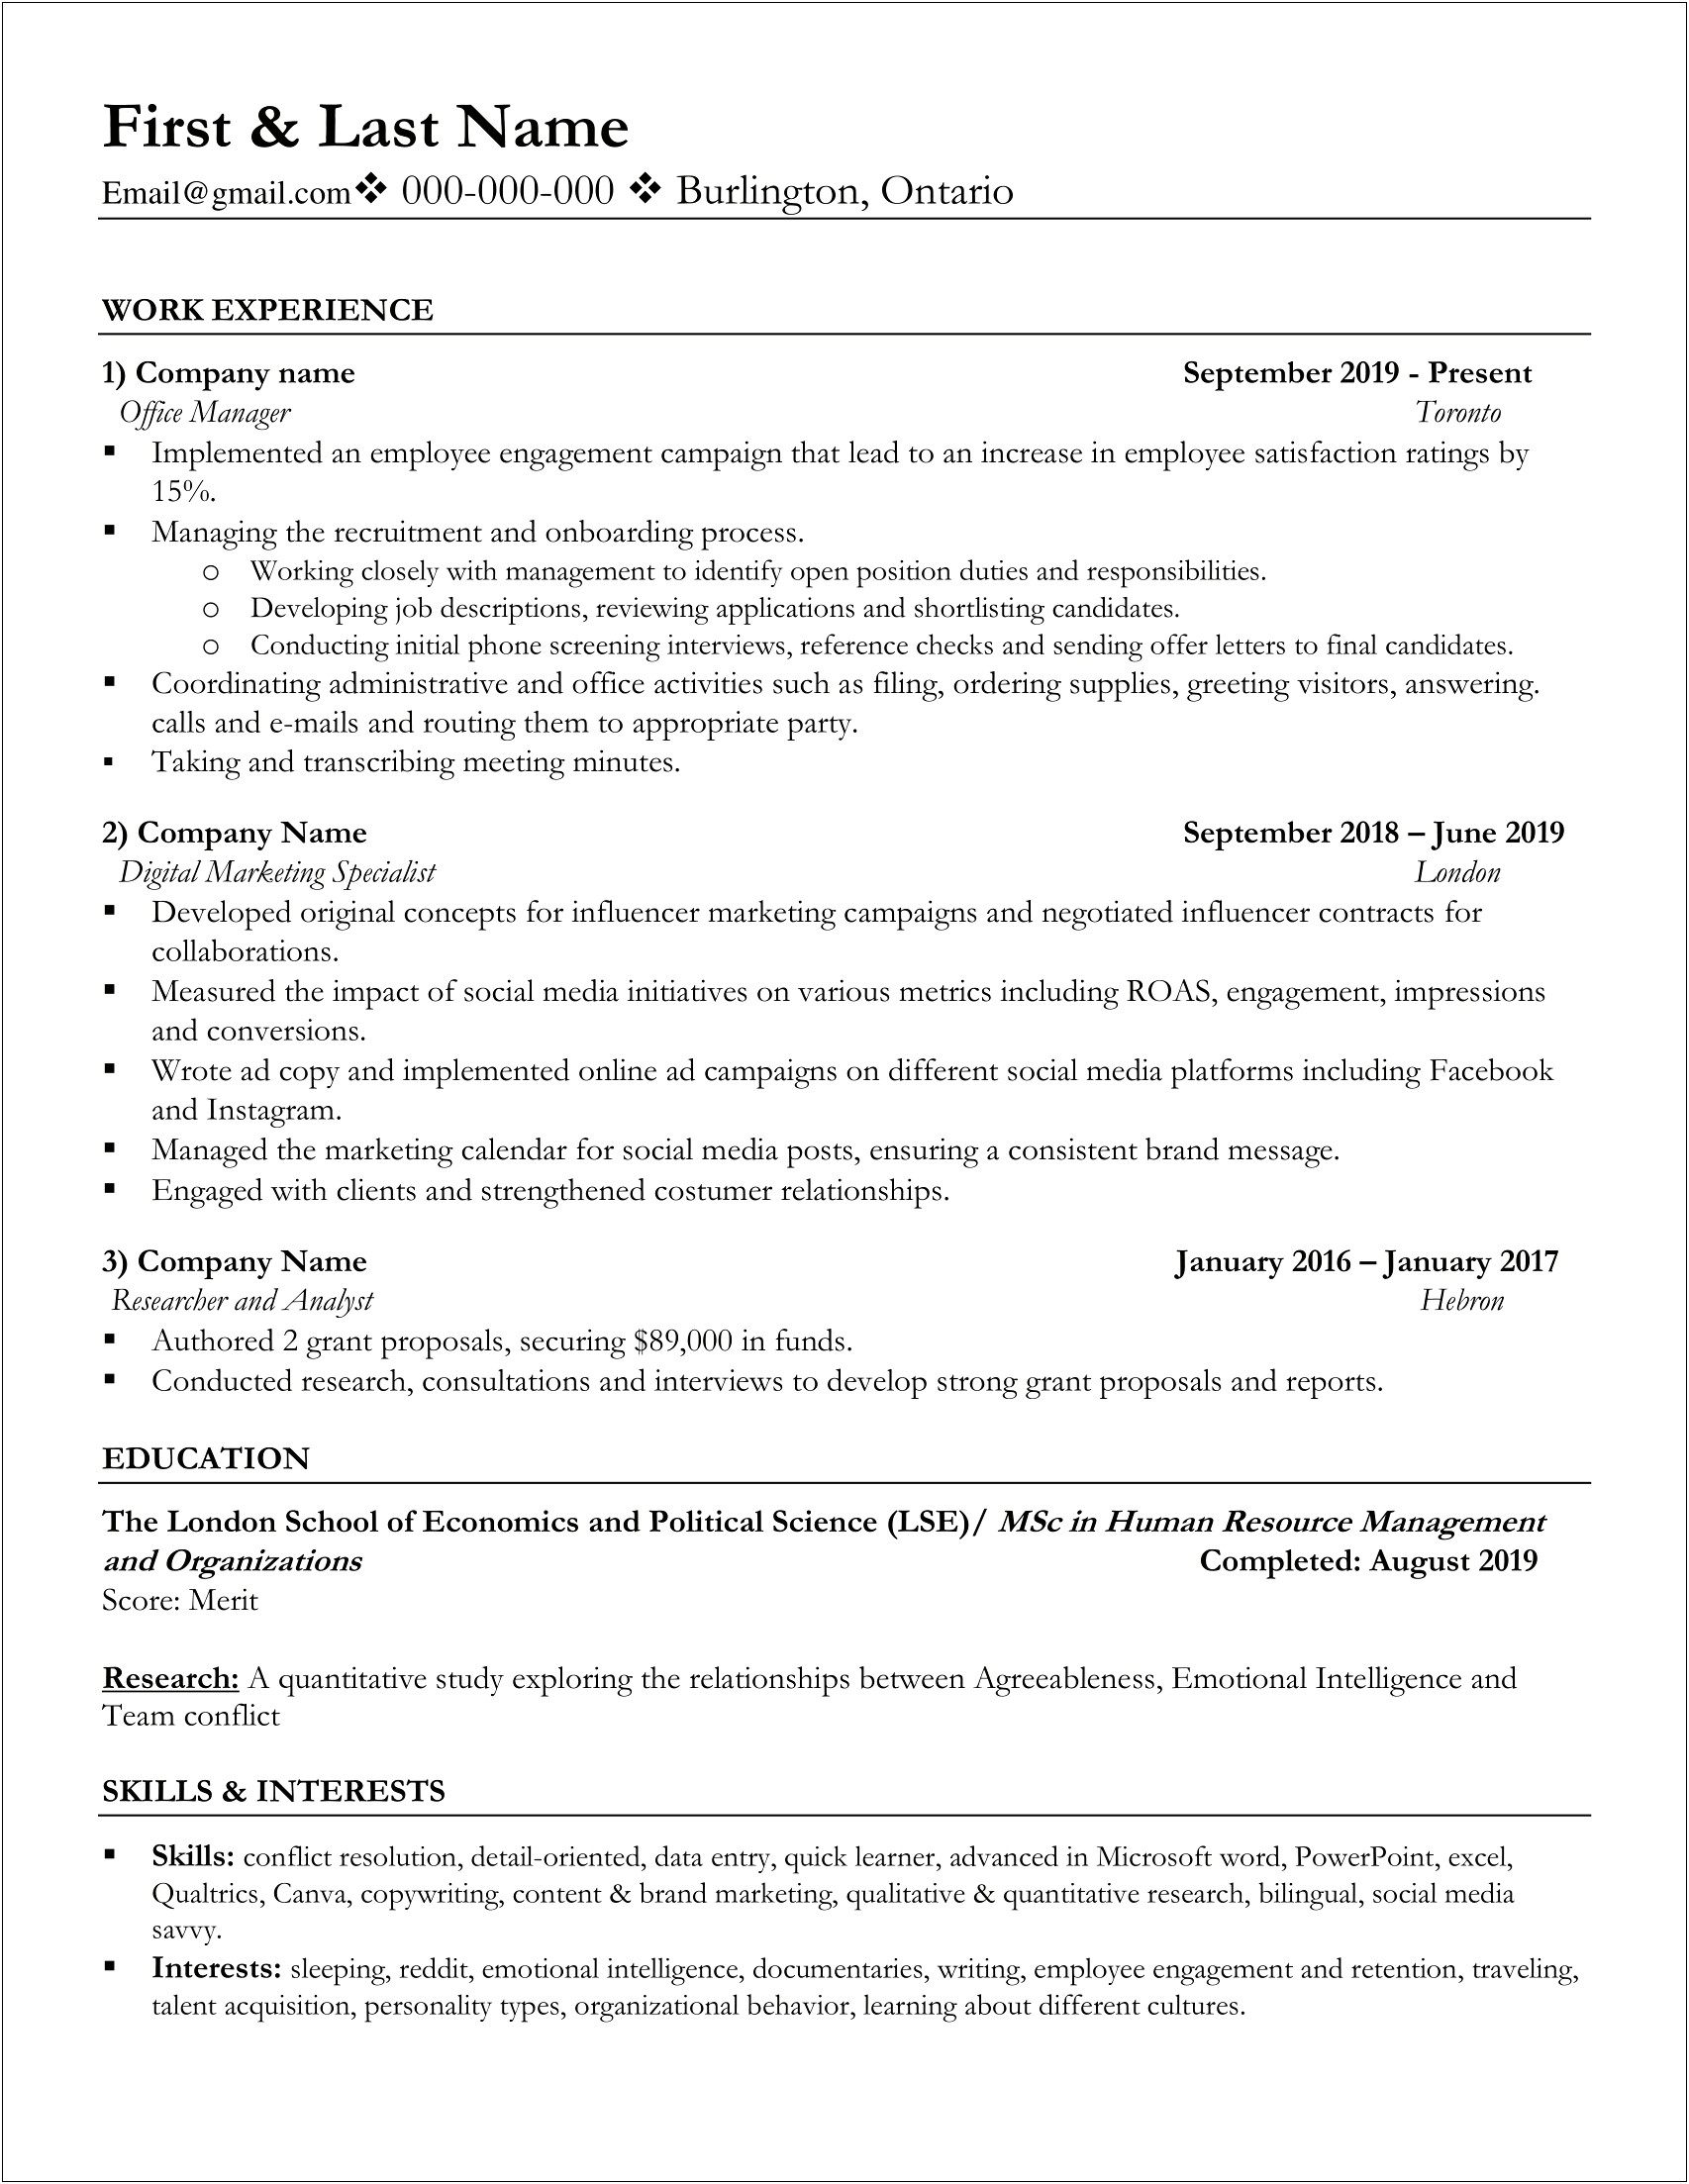 Spice Up Job Position For Resumes